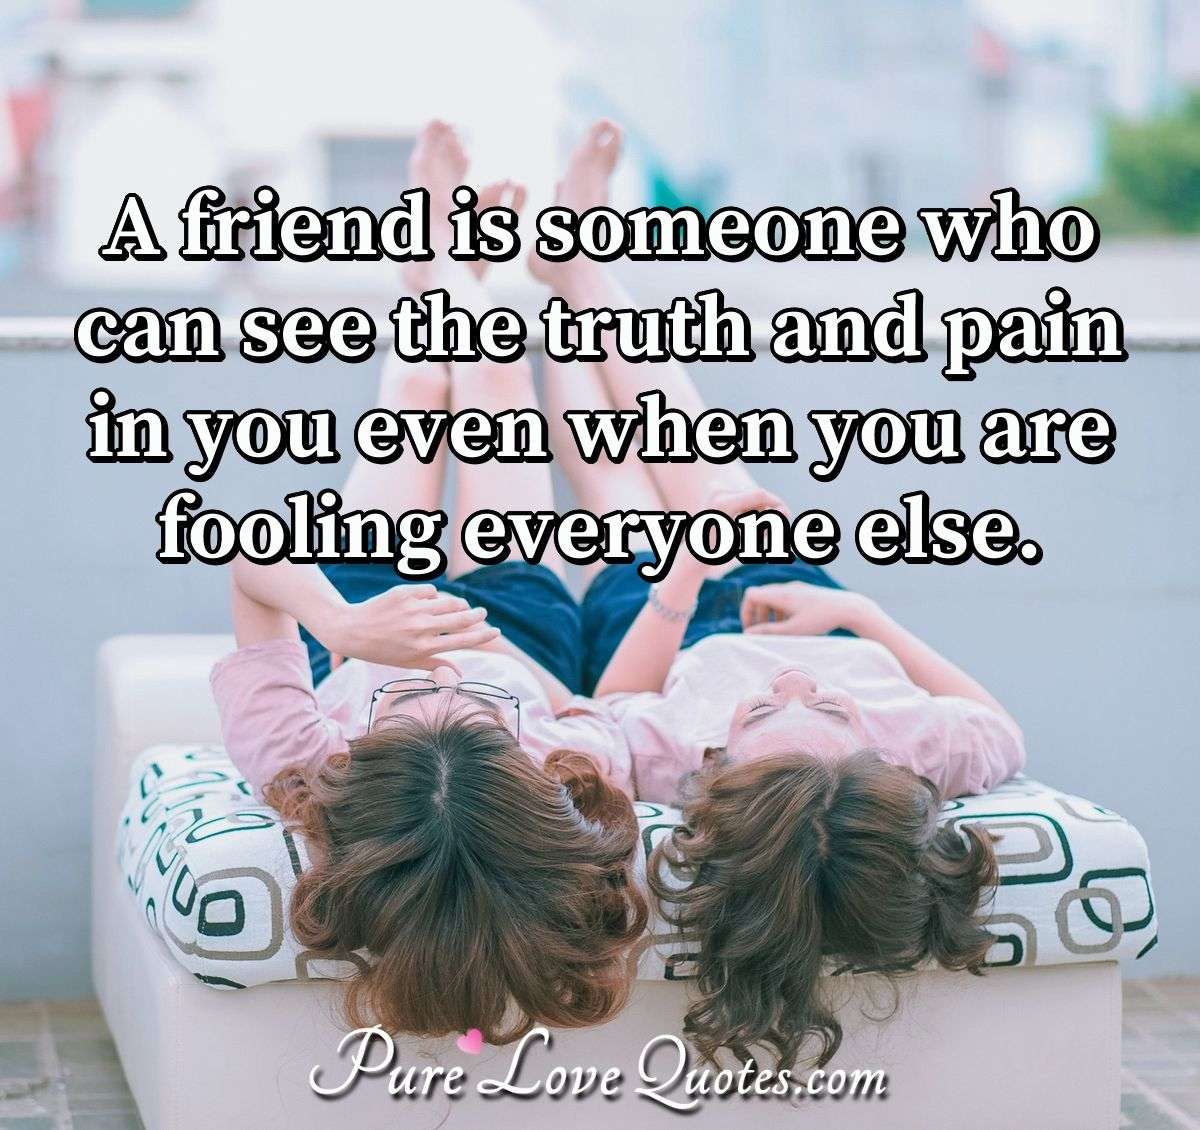 A friend is someone who can see the truth and pain in you even when you are fooling everyone else. - Anonymous